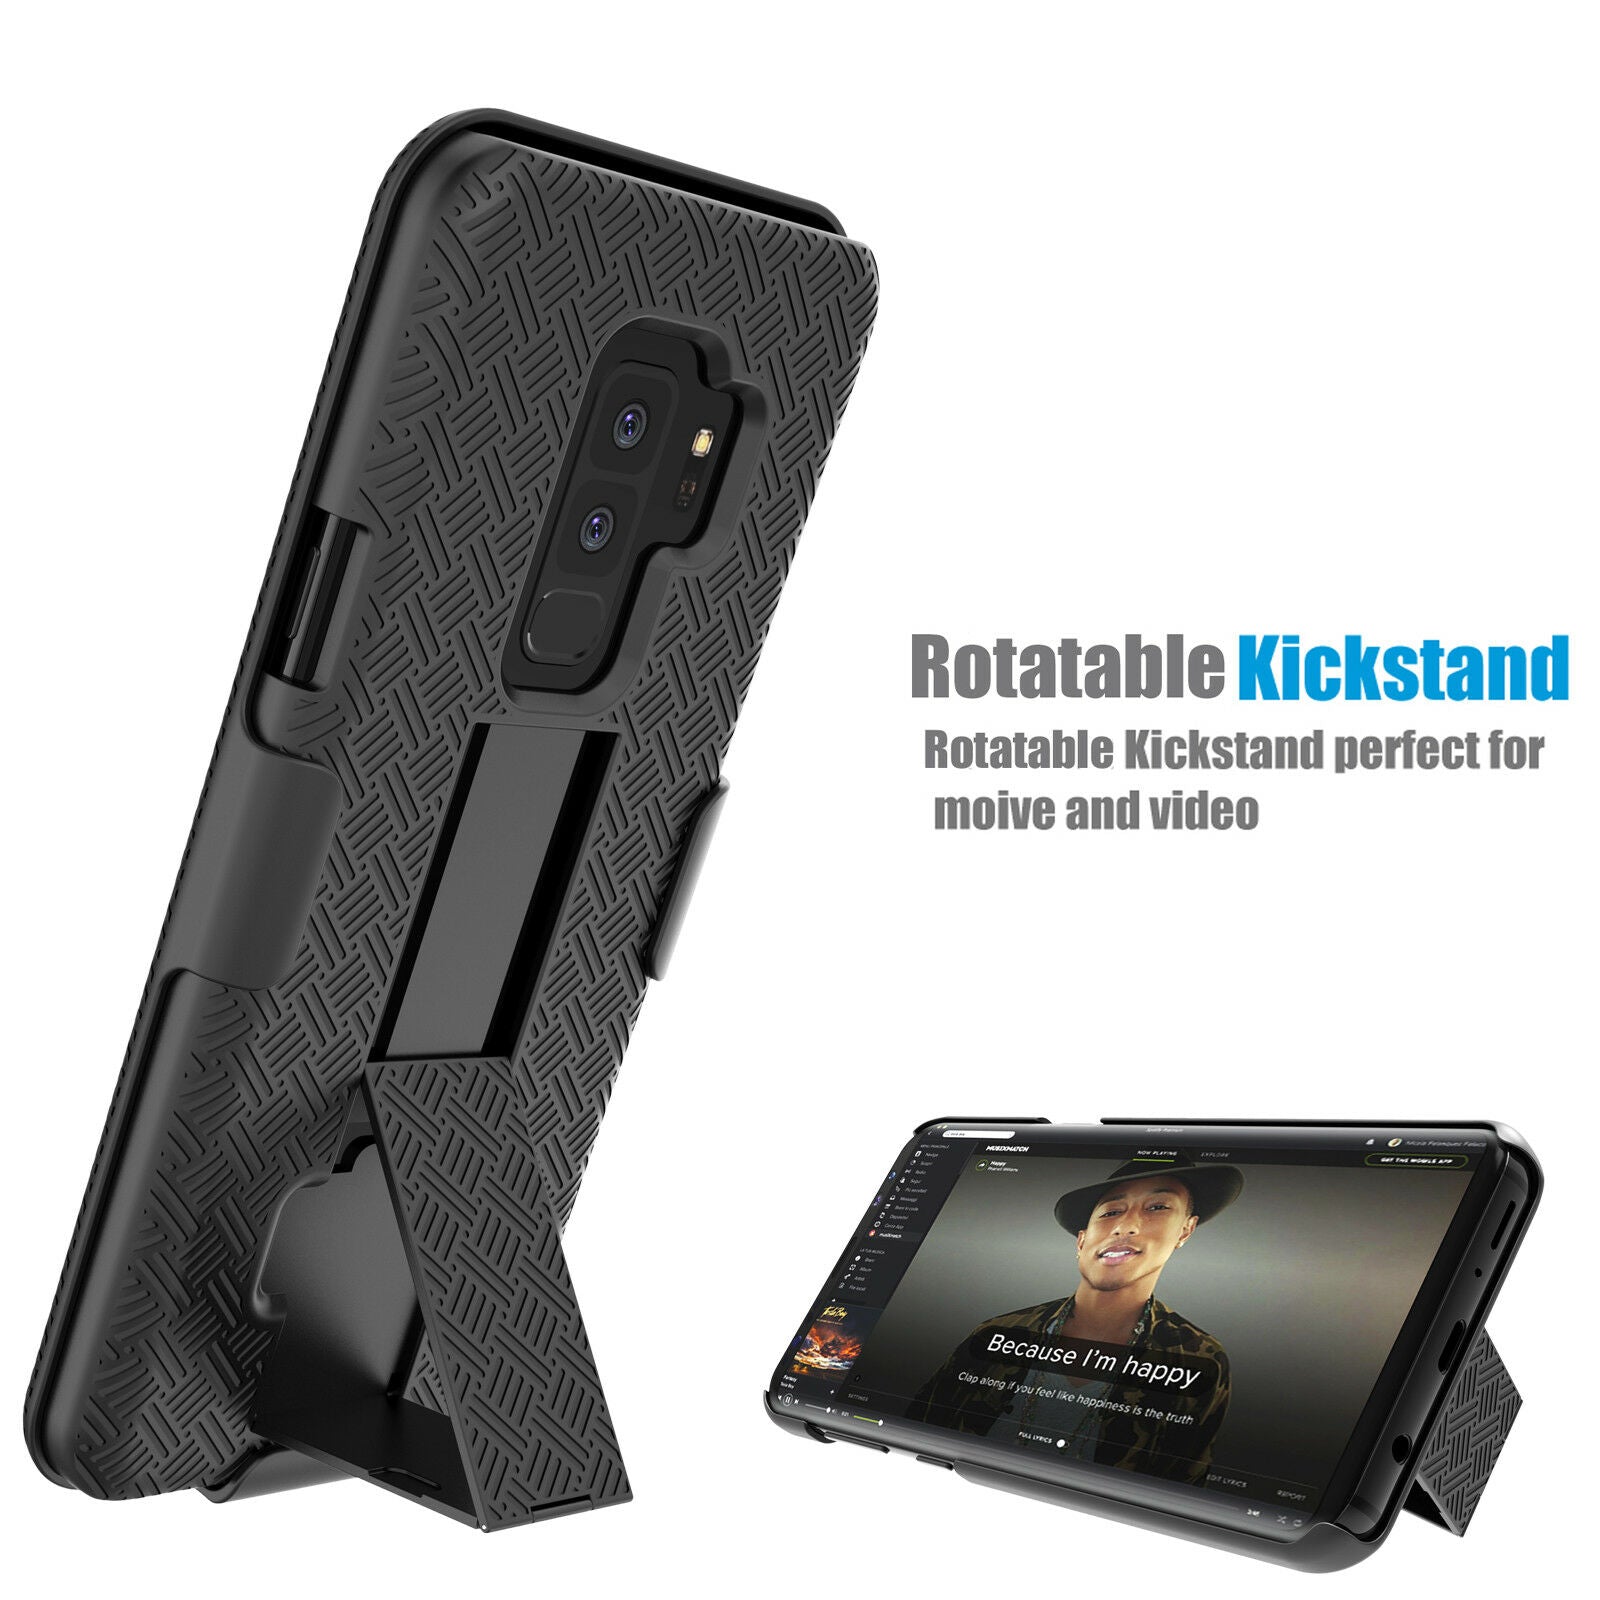 Heavy Duty 4 In 1 Combo Shockproof Armor Case With Belt Clip For Samsung Galaxy series - carolay.co